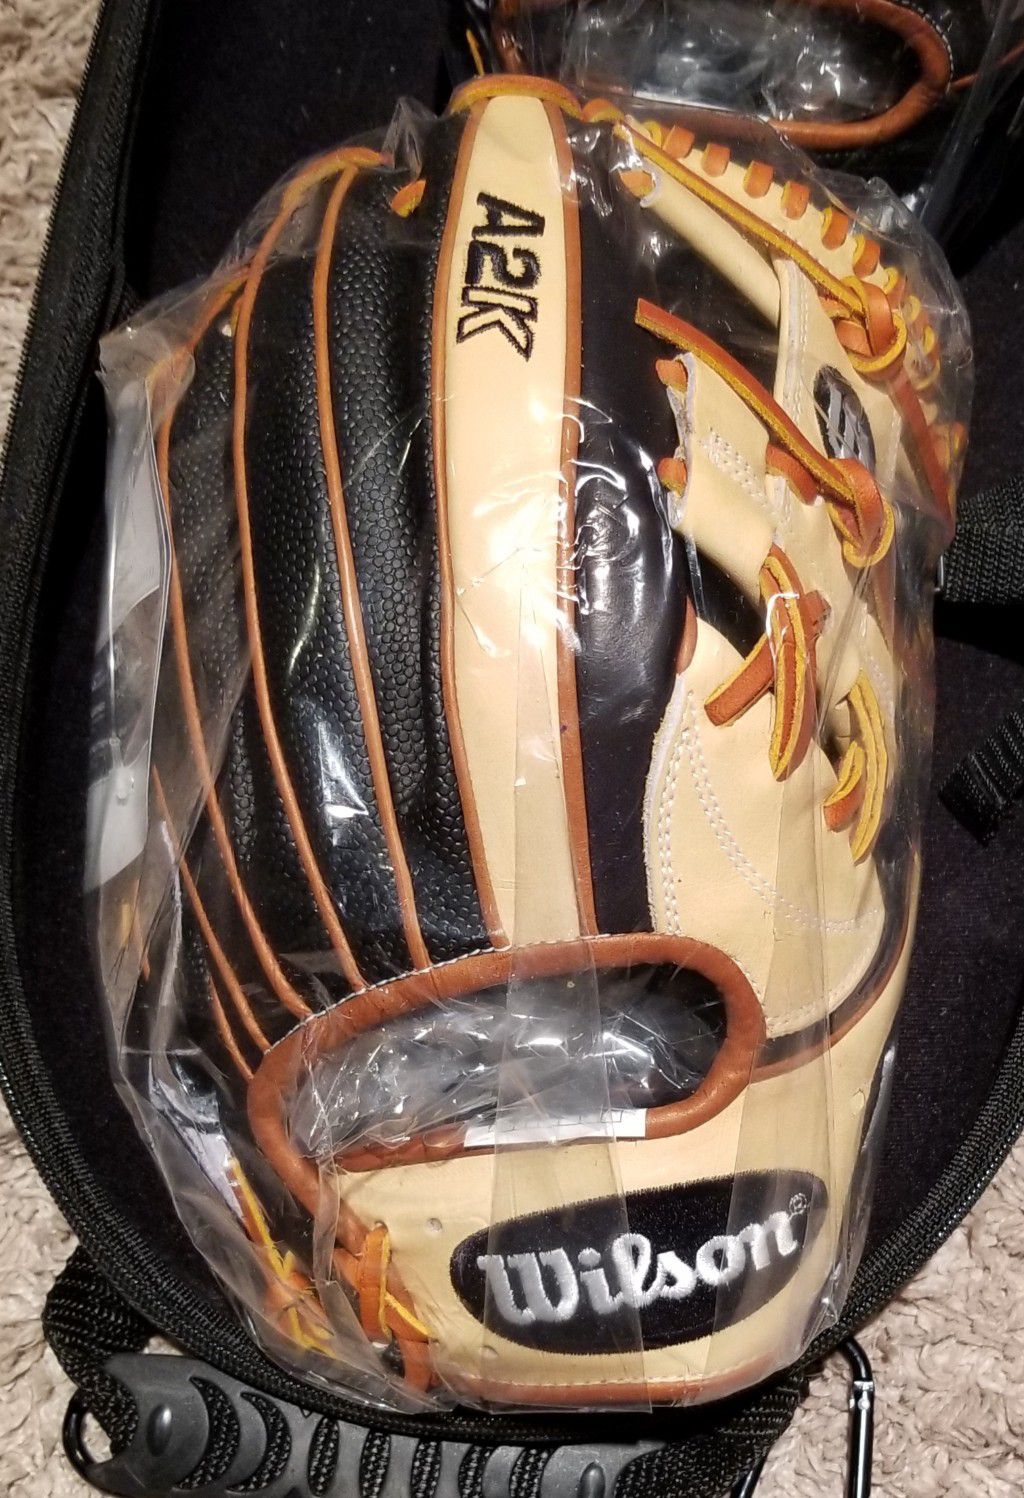 Retails for $359! NEW 2020 Black Superskin and blonde Wilson A2K Baseball Glove 11.75"